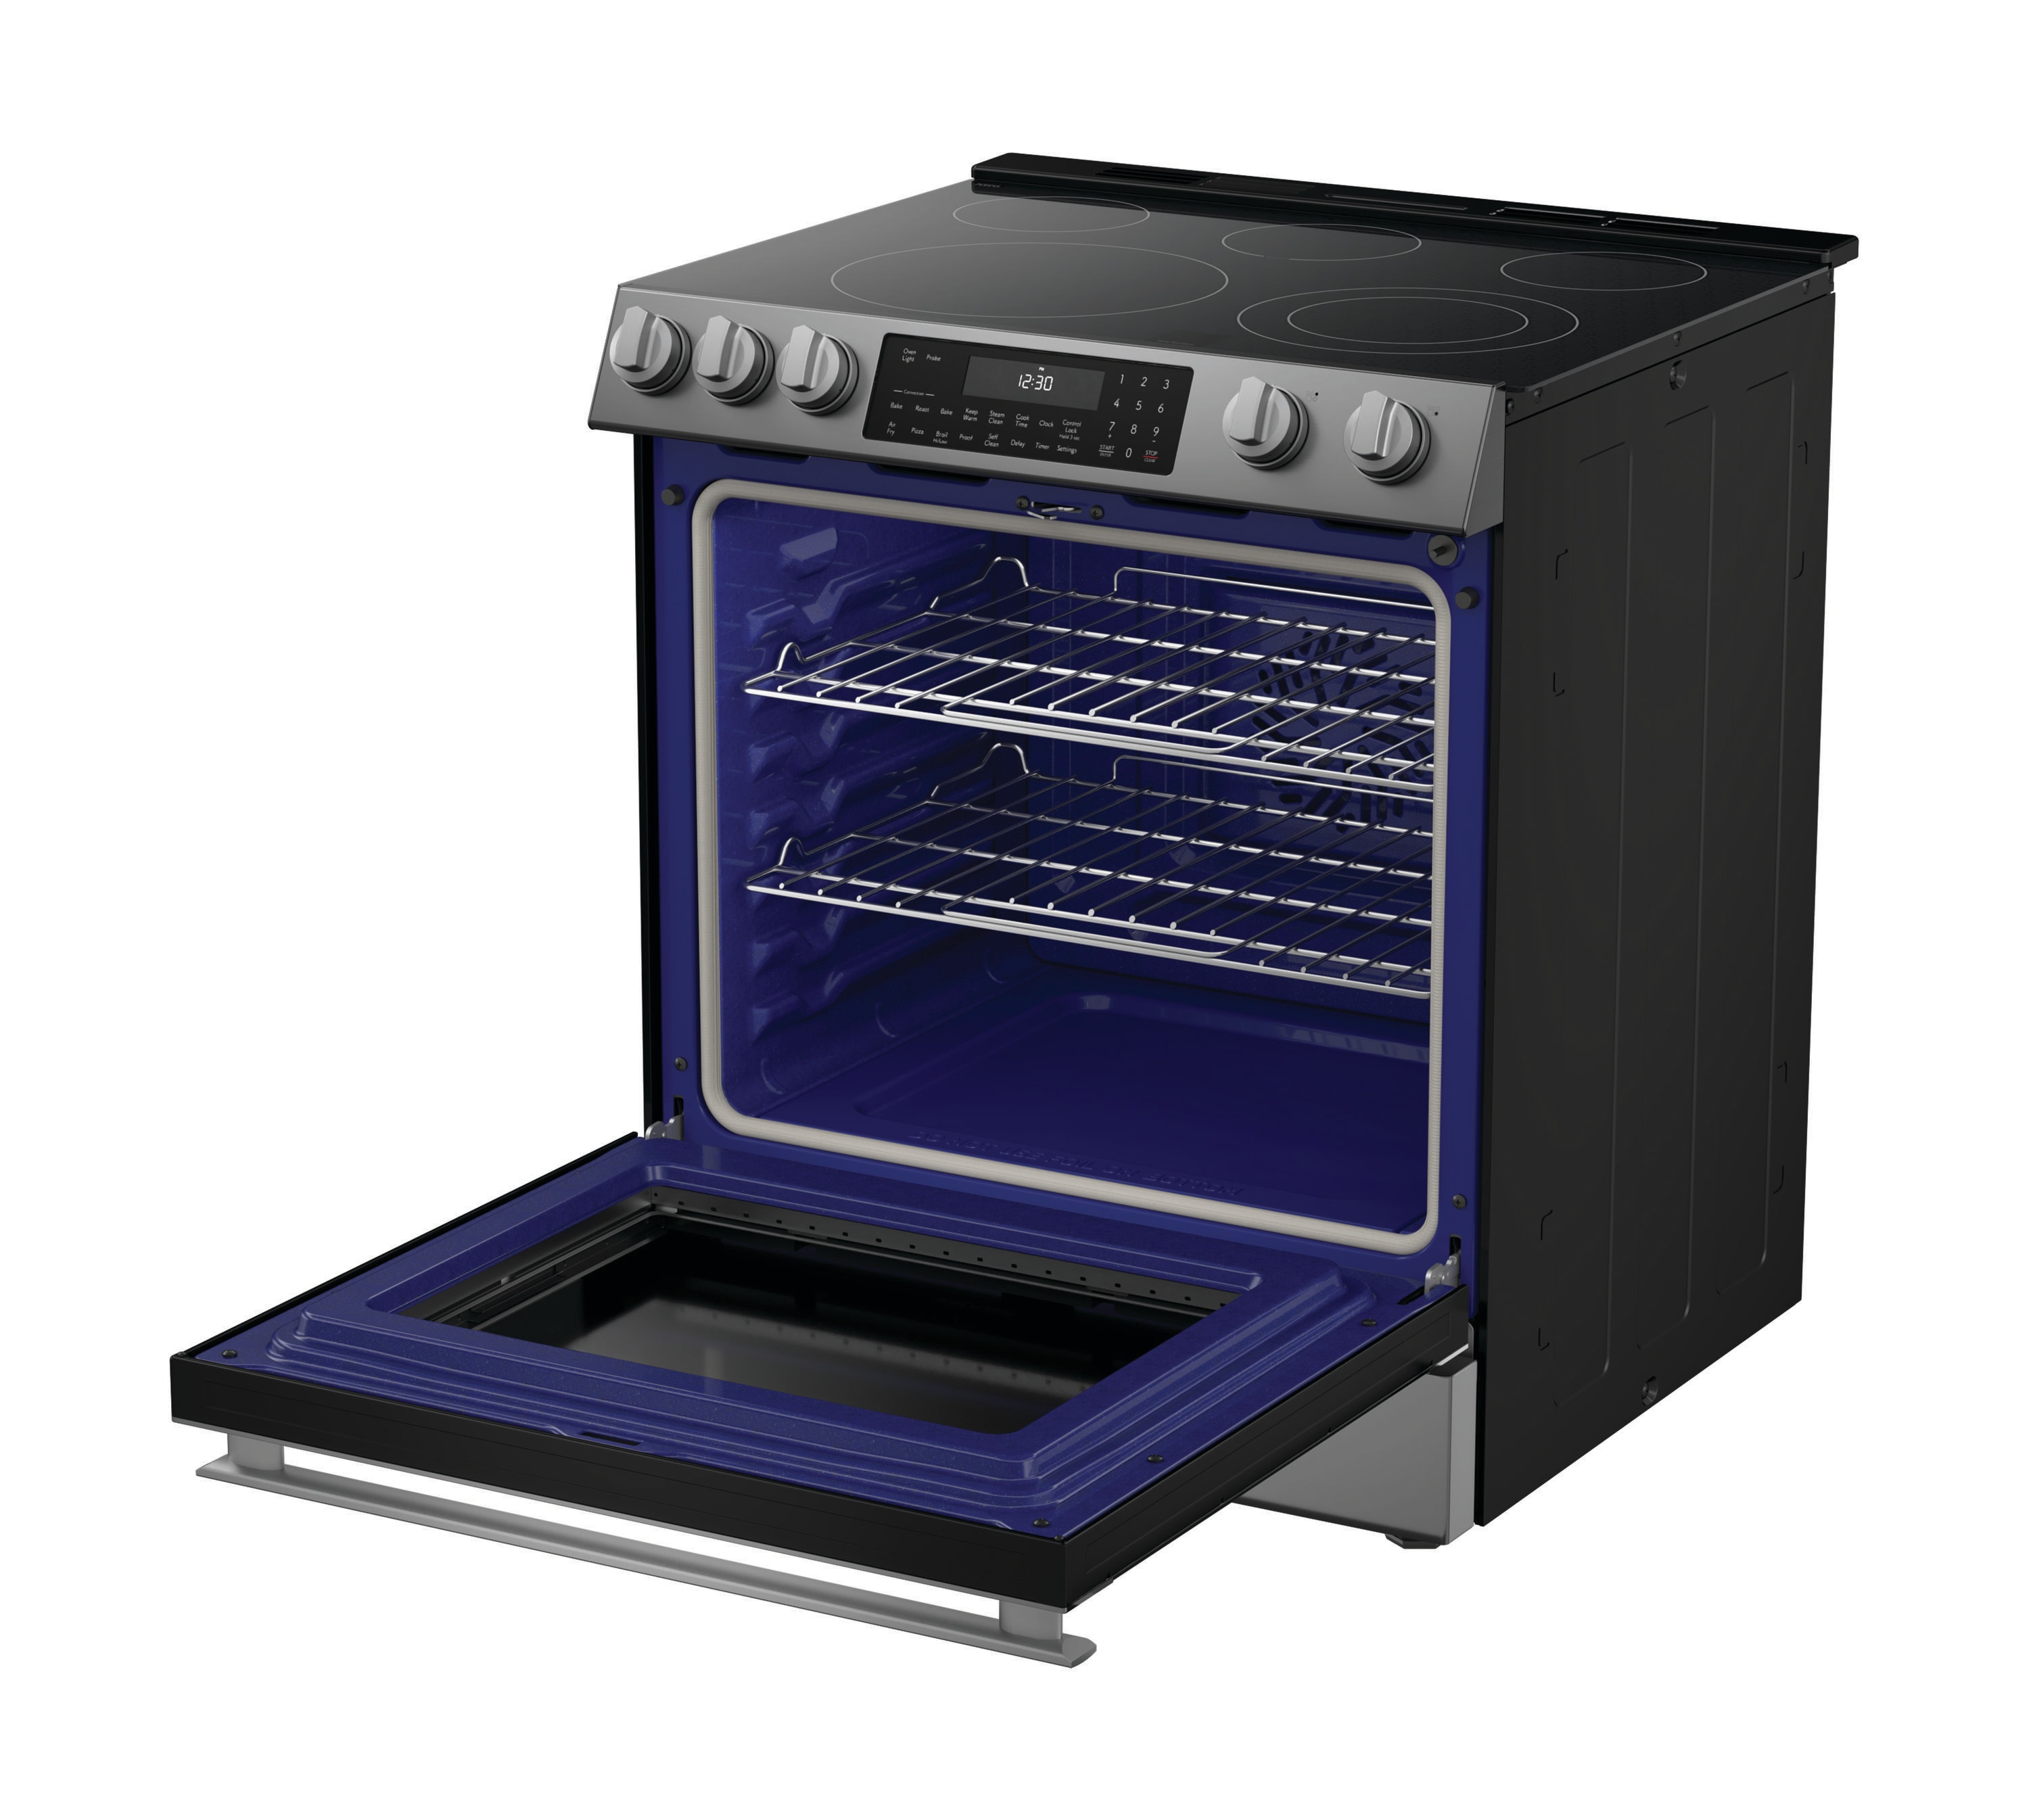 Jenn-Air 30 Inch Slide-in Electric Range with 5 Burners, 5 Elements,  Smoothtop, Convection, Self-Clean Oven Baking Drawer, AquaLift  Self-Cleaning Technology, Glass Ceramic Surface in Stainless LOCATED IN OUR  PORTLAND OREGON APPLIANCE STORE